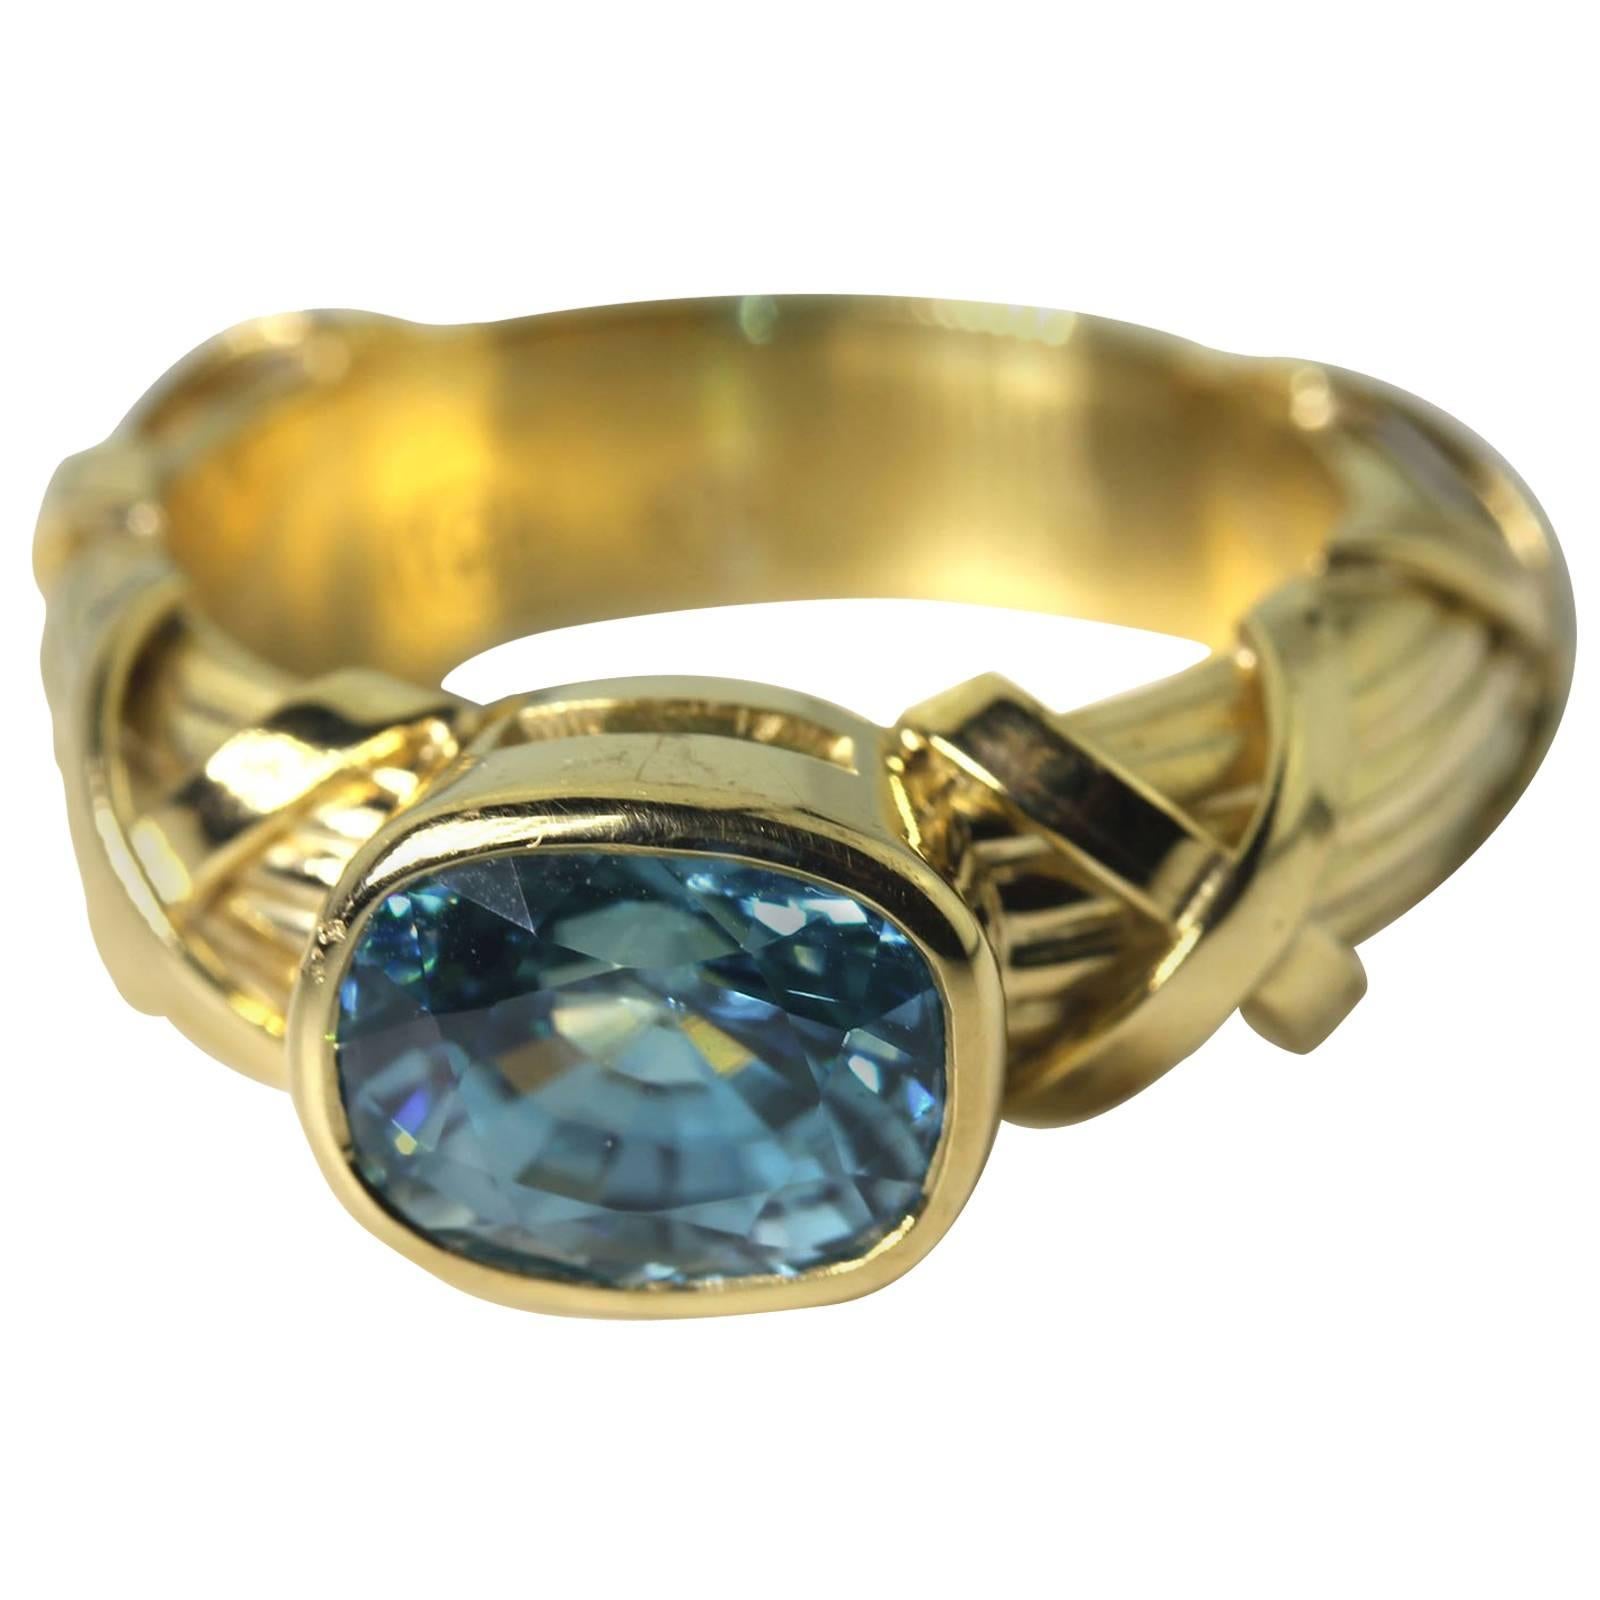 Glittering flashing 4 carat blue Zircon set in a unique handmade 18 karat yellow gold ring size 7 (sizable for free). The ring is sizable. 